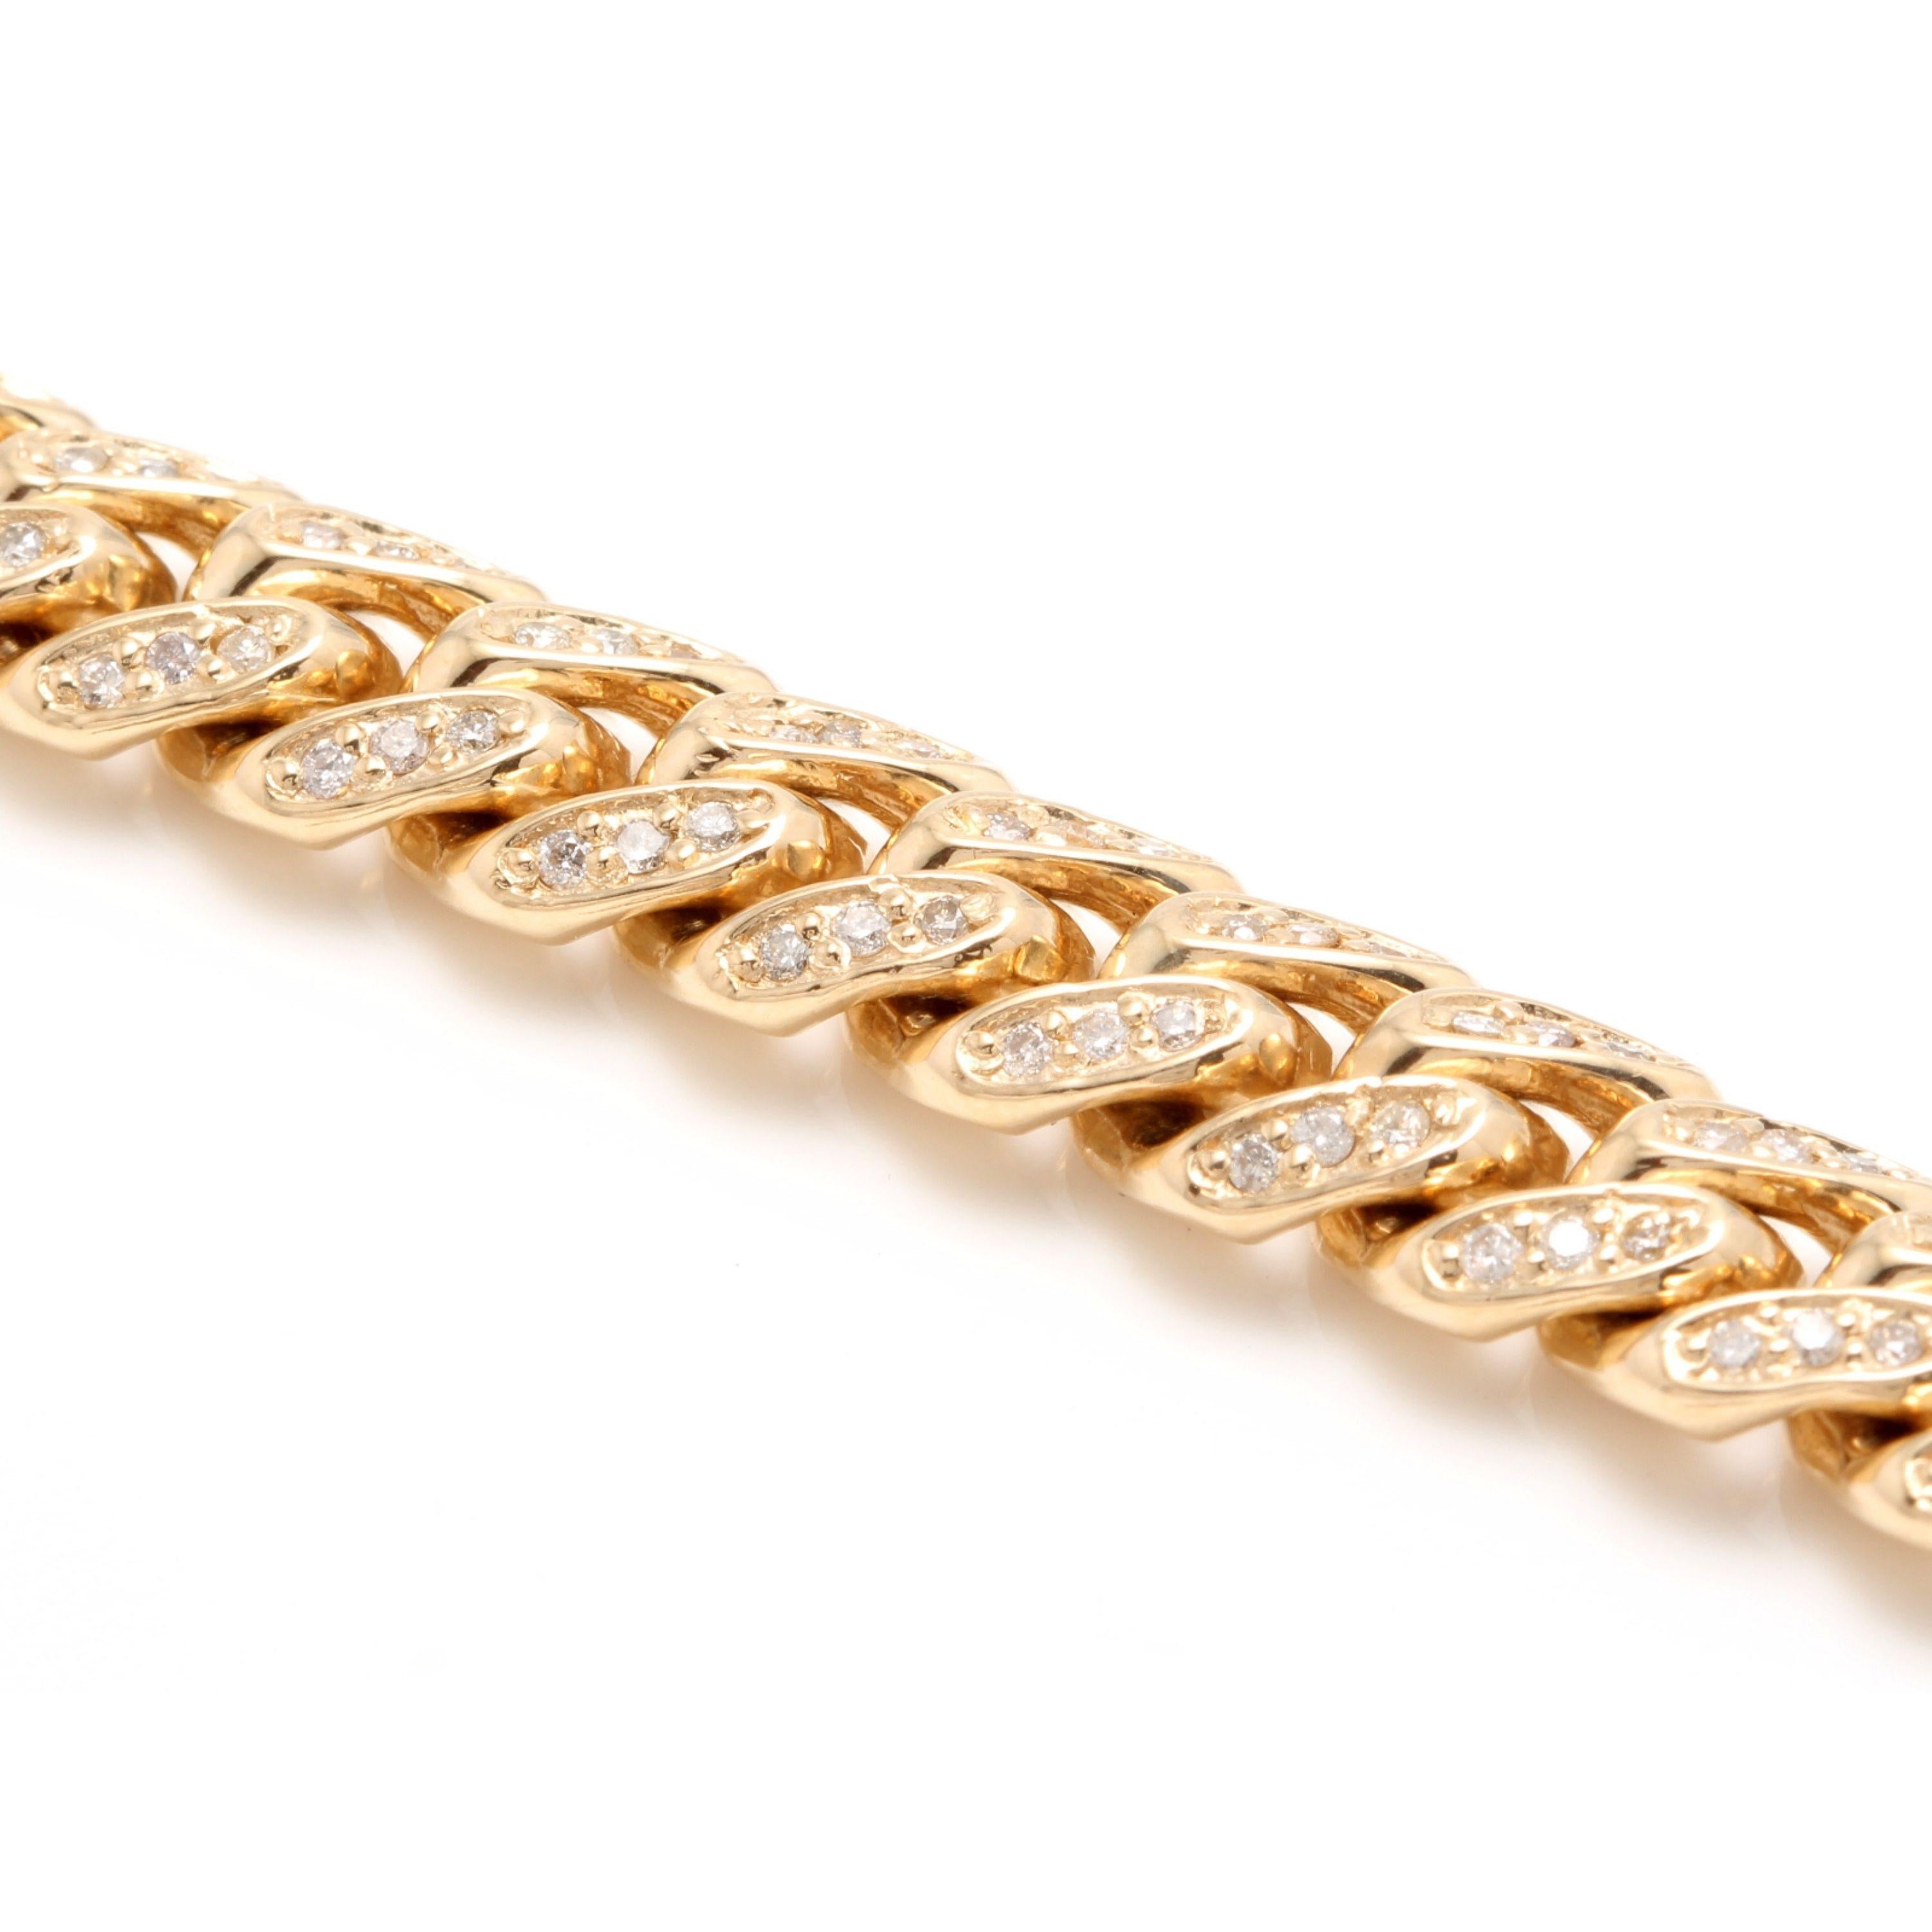 Very Impressive 6.00 Carats Natural Diamond 14K Solid Yellow Gold Men's Miami Cuban Link Bracelet

STAMPED: 14K

Total Natural Round Cut Diamonds Weight is: Approx. 6.00 Carats (color H-I / Clarity SI1-SI2)

Bracelet Length is: 8.5 inches

Bracelet